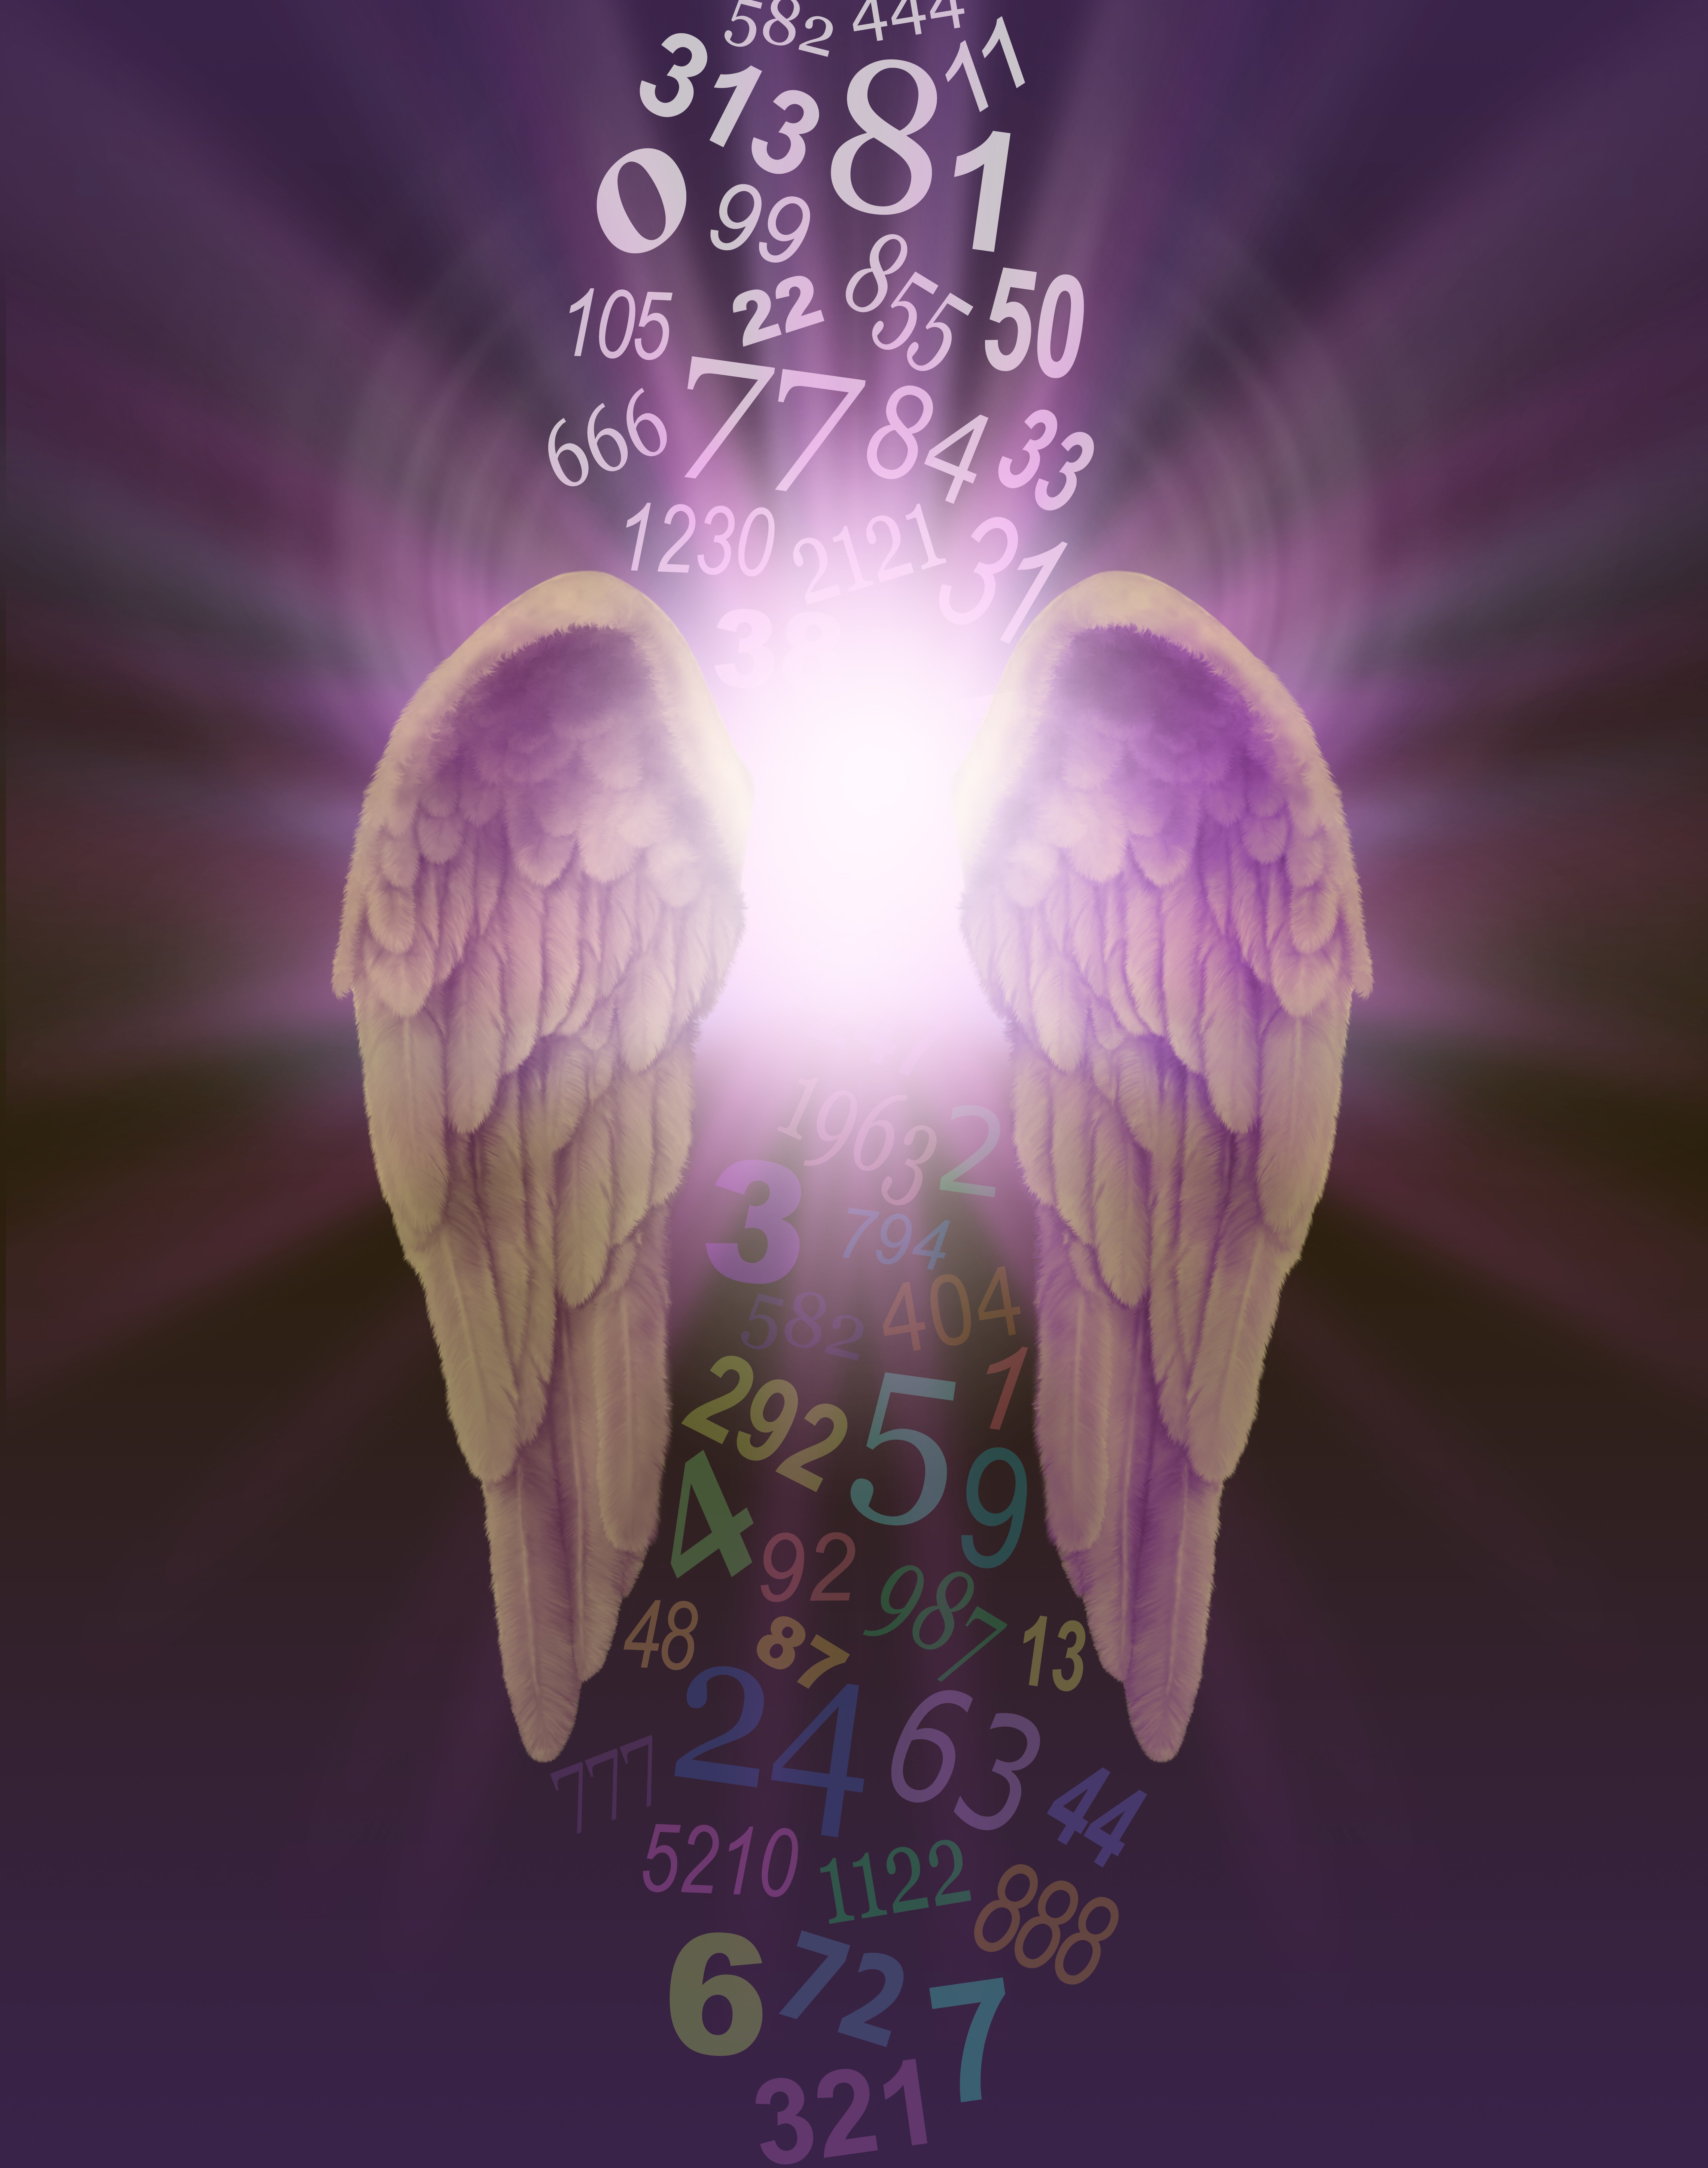 Angel wings are connected by an orb of light against a galactic background with different angel number sequences | Source: Shutterstock